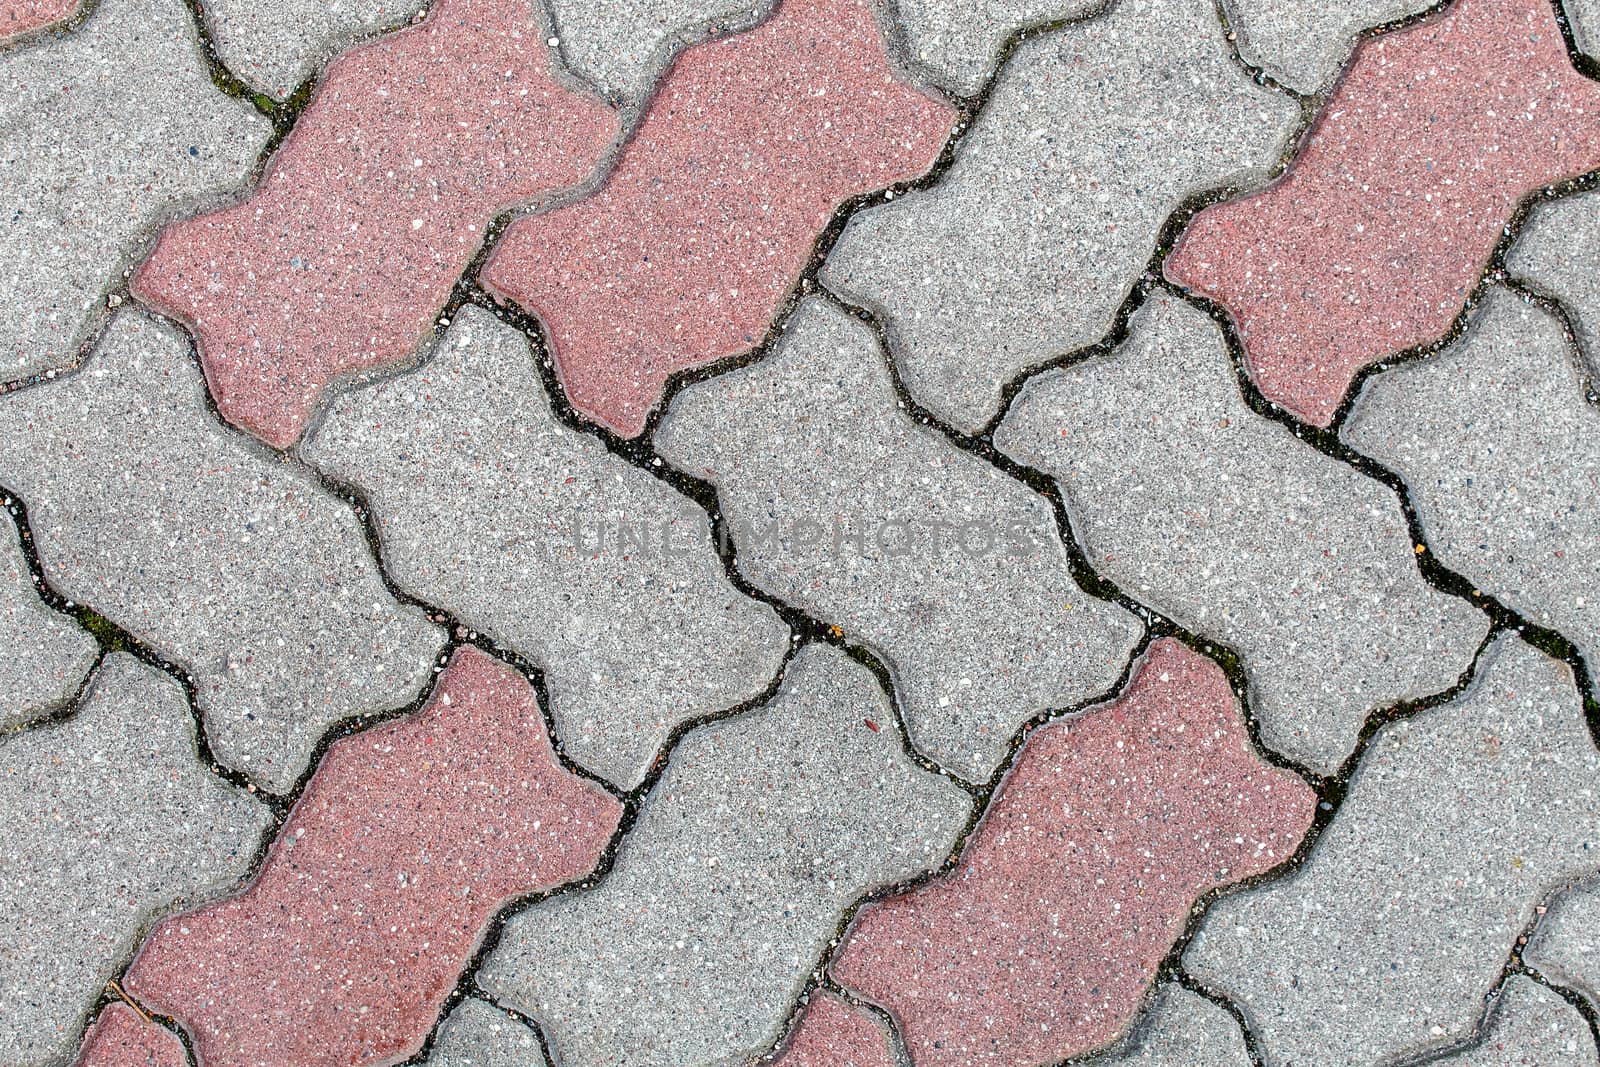 road paved with sidewalk tiles. beautiful brick background with, masonry texture of light brown and gray bricks. outdoor closeup